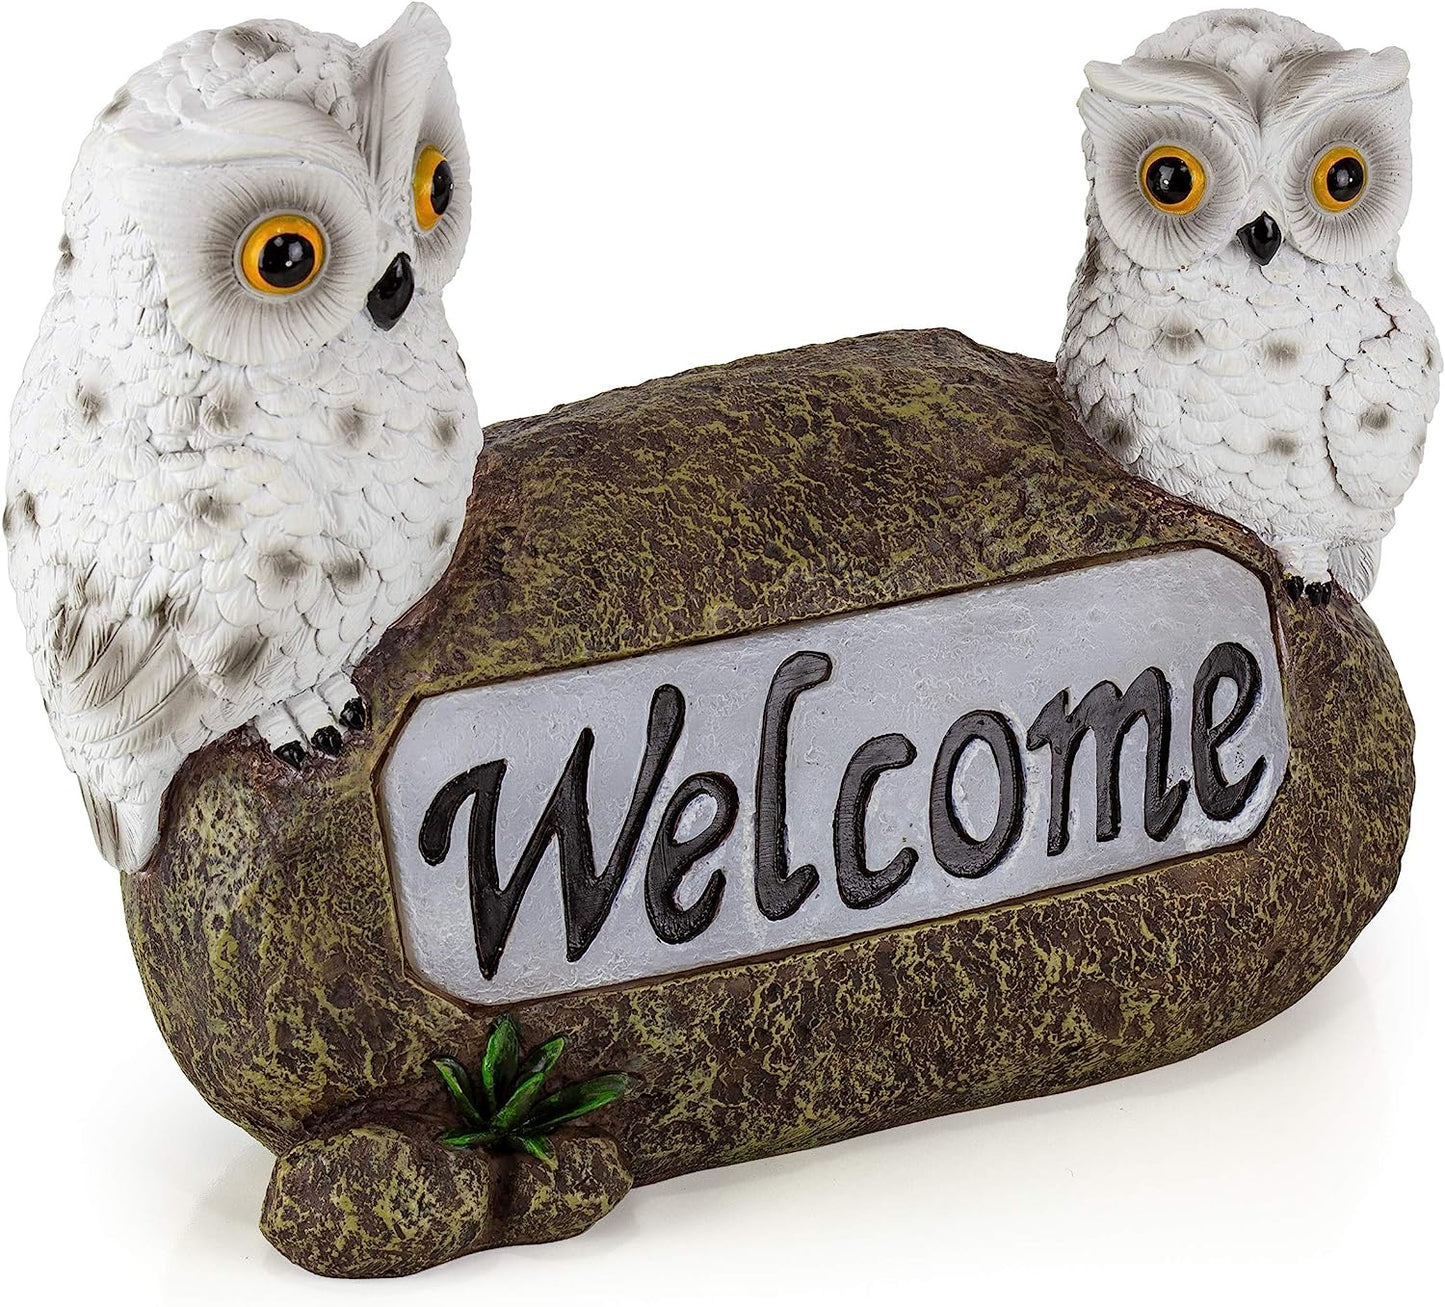 Welcome Owls Solar Powered Outdoor Decor LED Garden Light Welcome Owl Statues Outdoor owl Decor Funny Figurine Decor for Outside Patio, Yard, Lawn